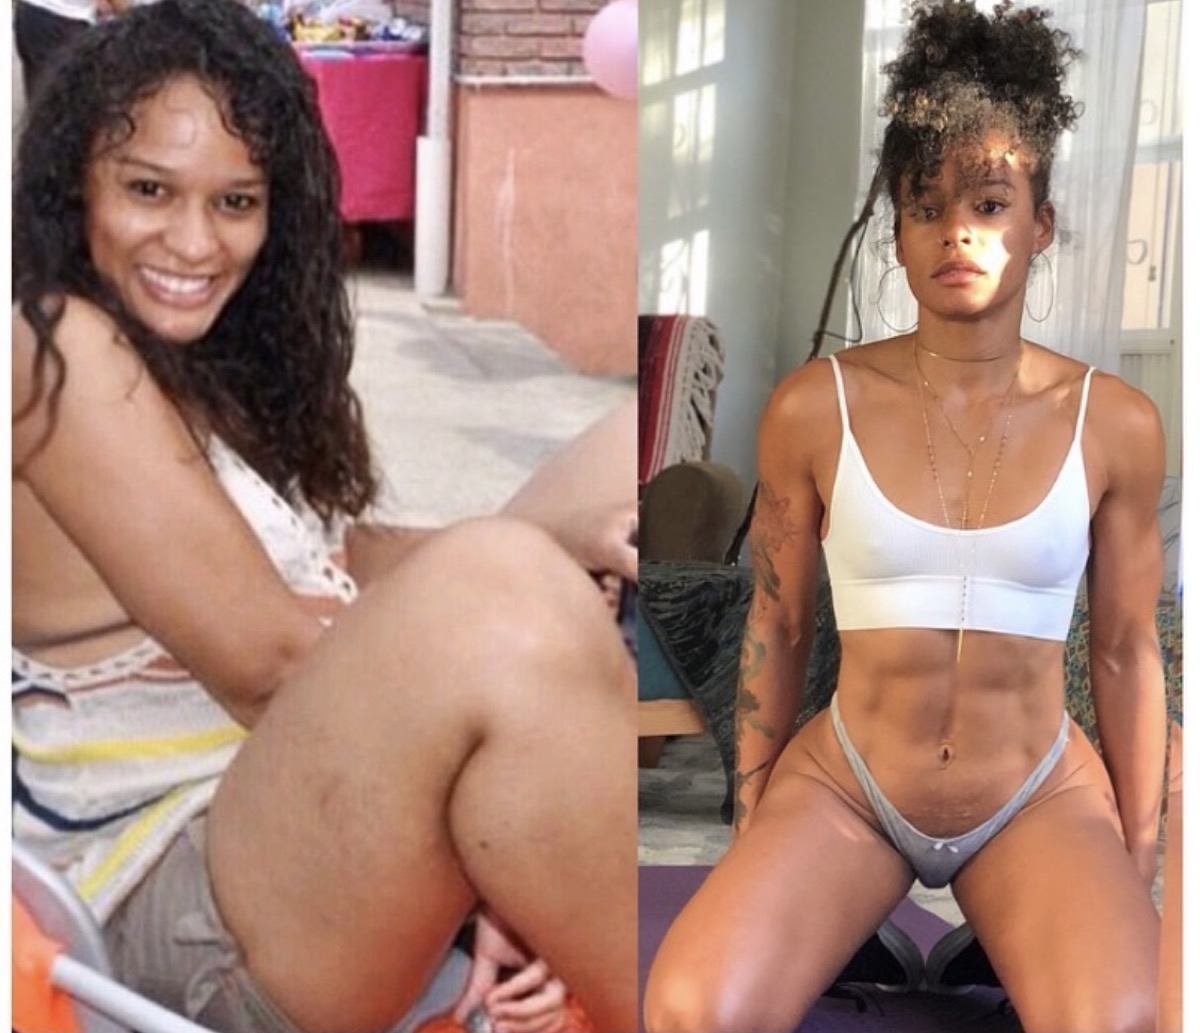 melissa alcantara in side by side photo in which she is very fit on the righthand side